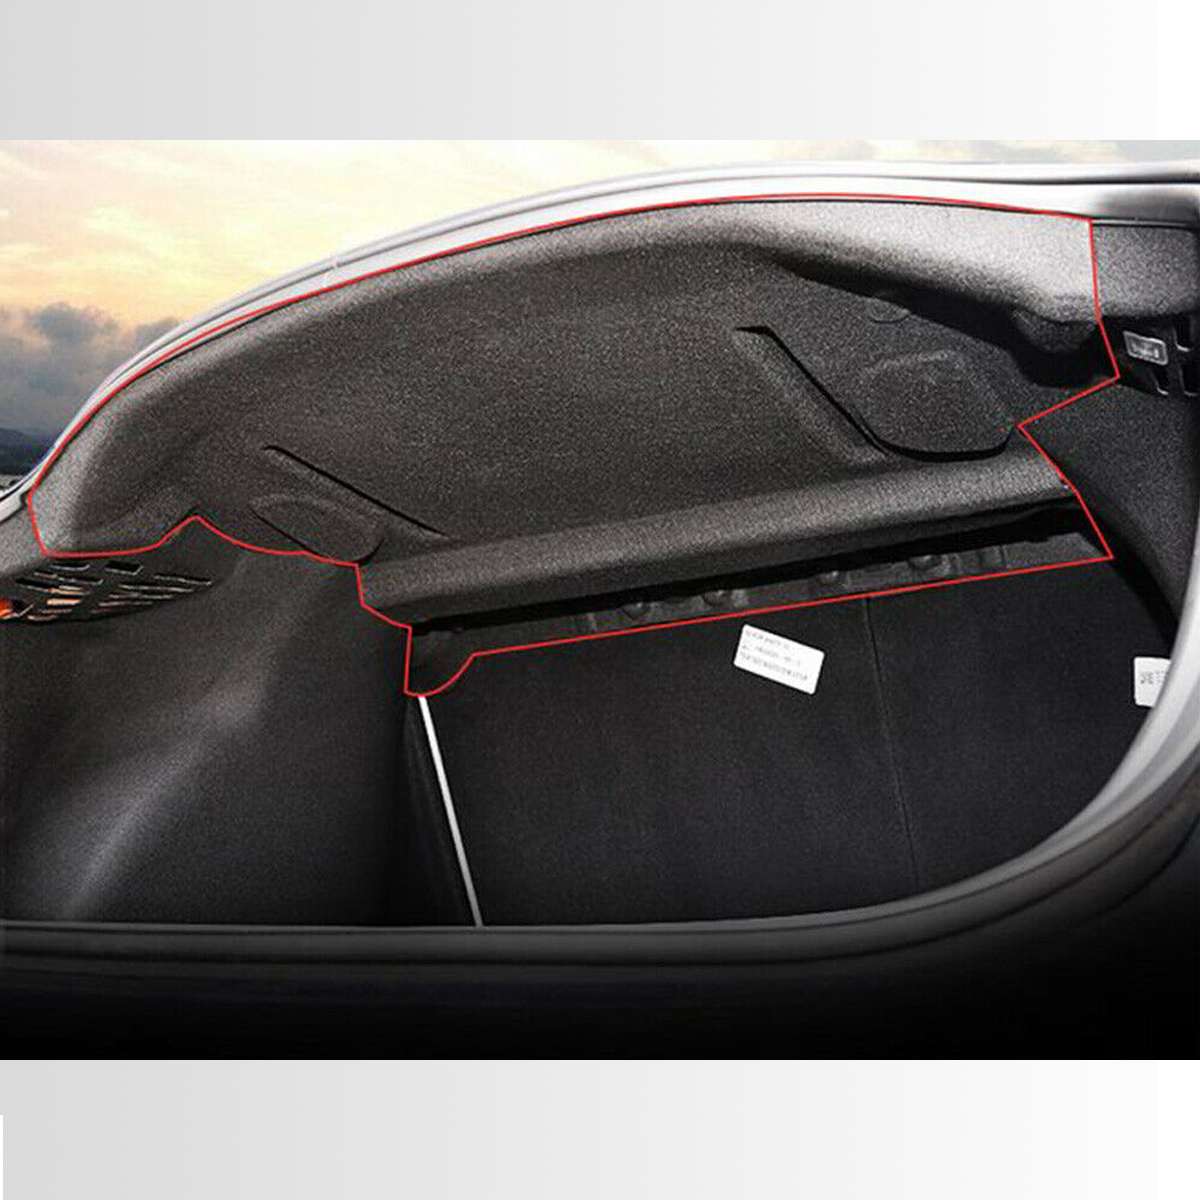 Car Rear Trunk Soundproof Cotton Mat Sound Proof Protective Pad Deadening Protective Cover For Tesla Model 3 2017 2018 2019